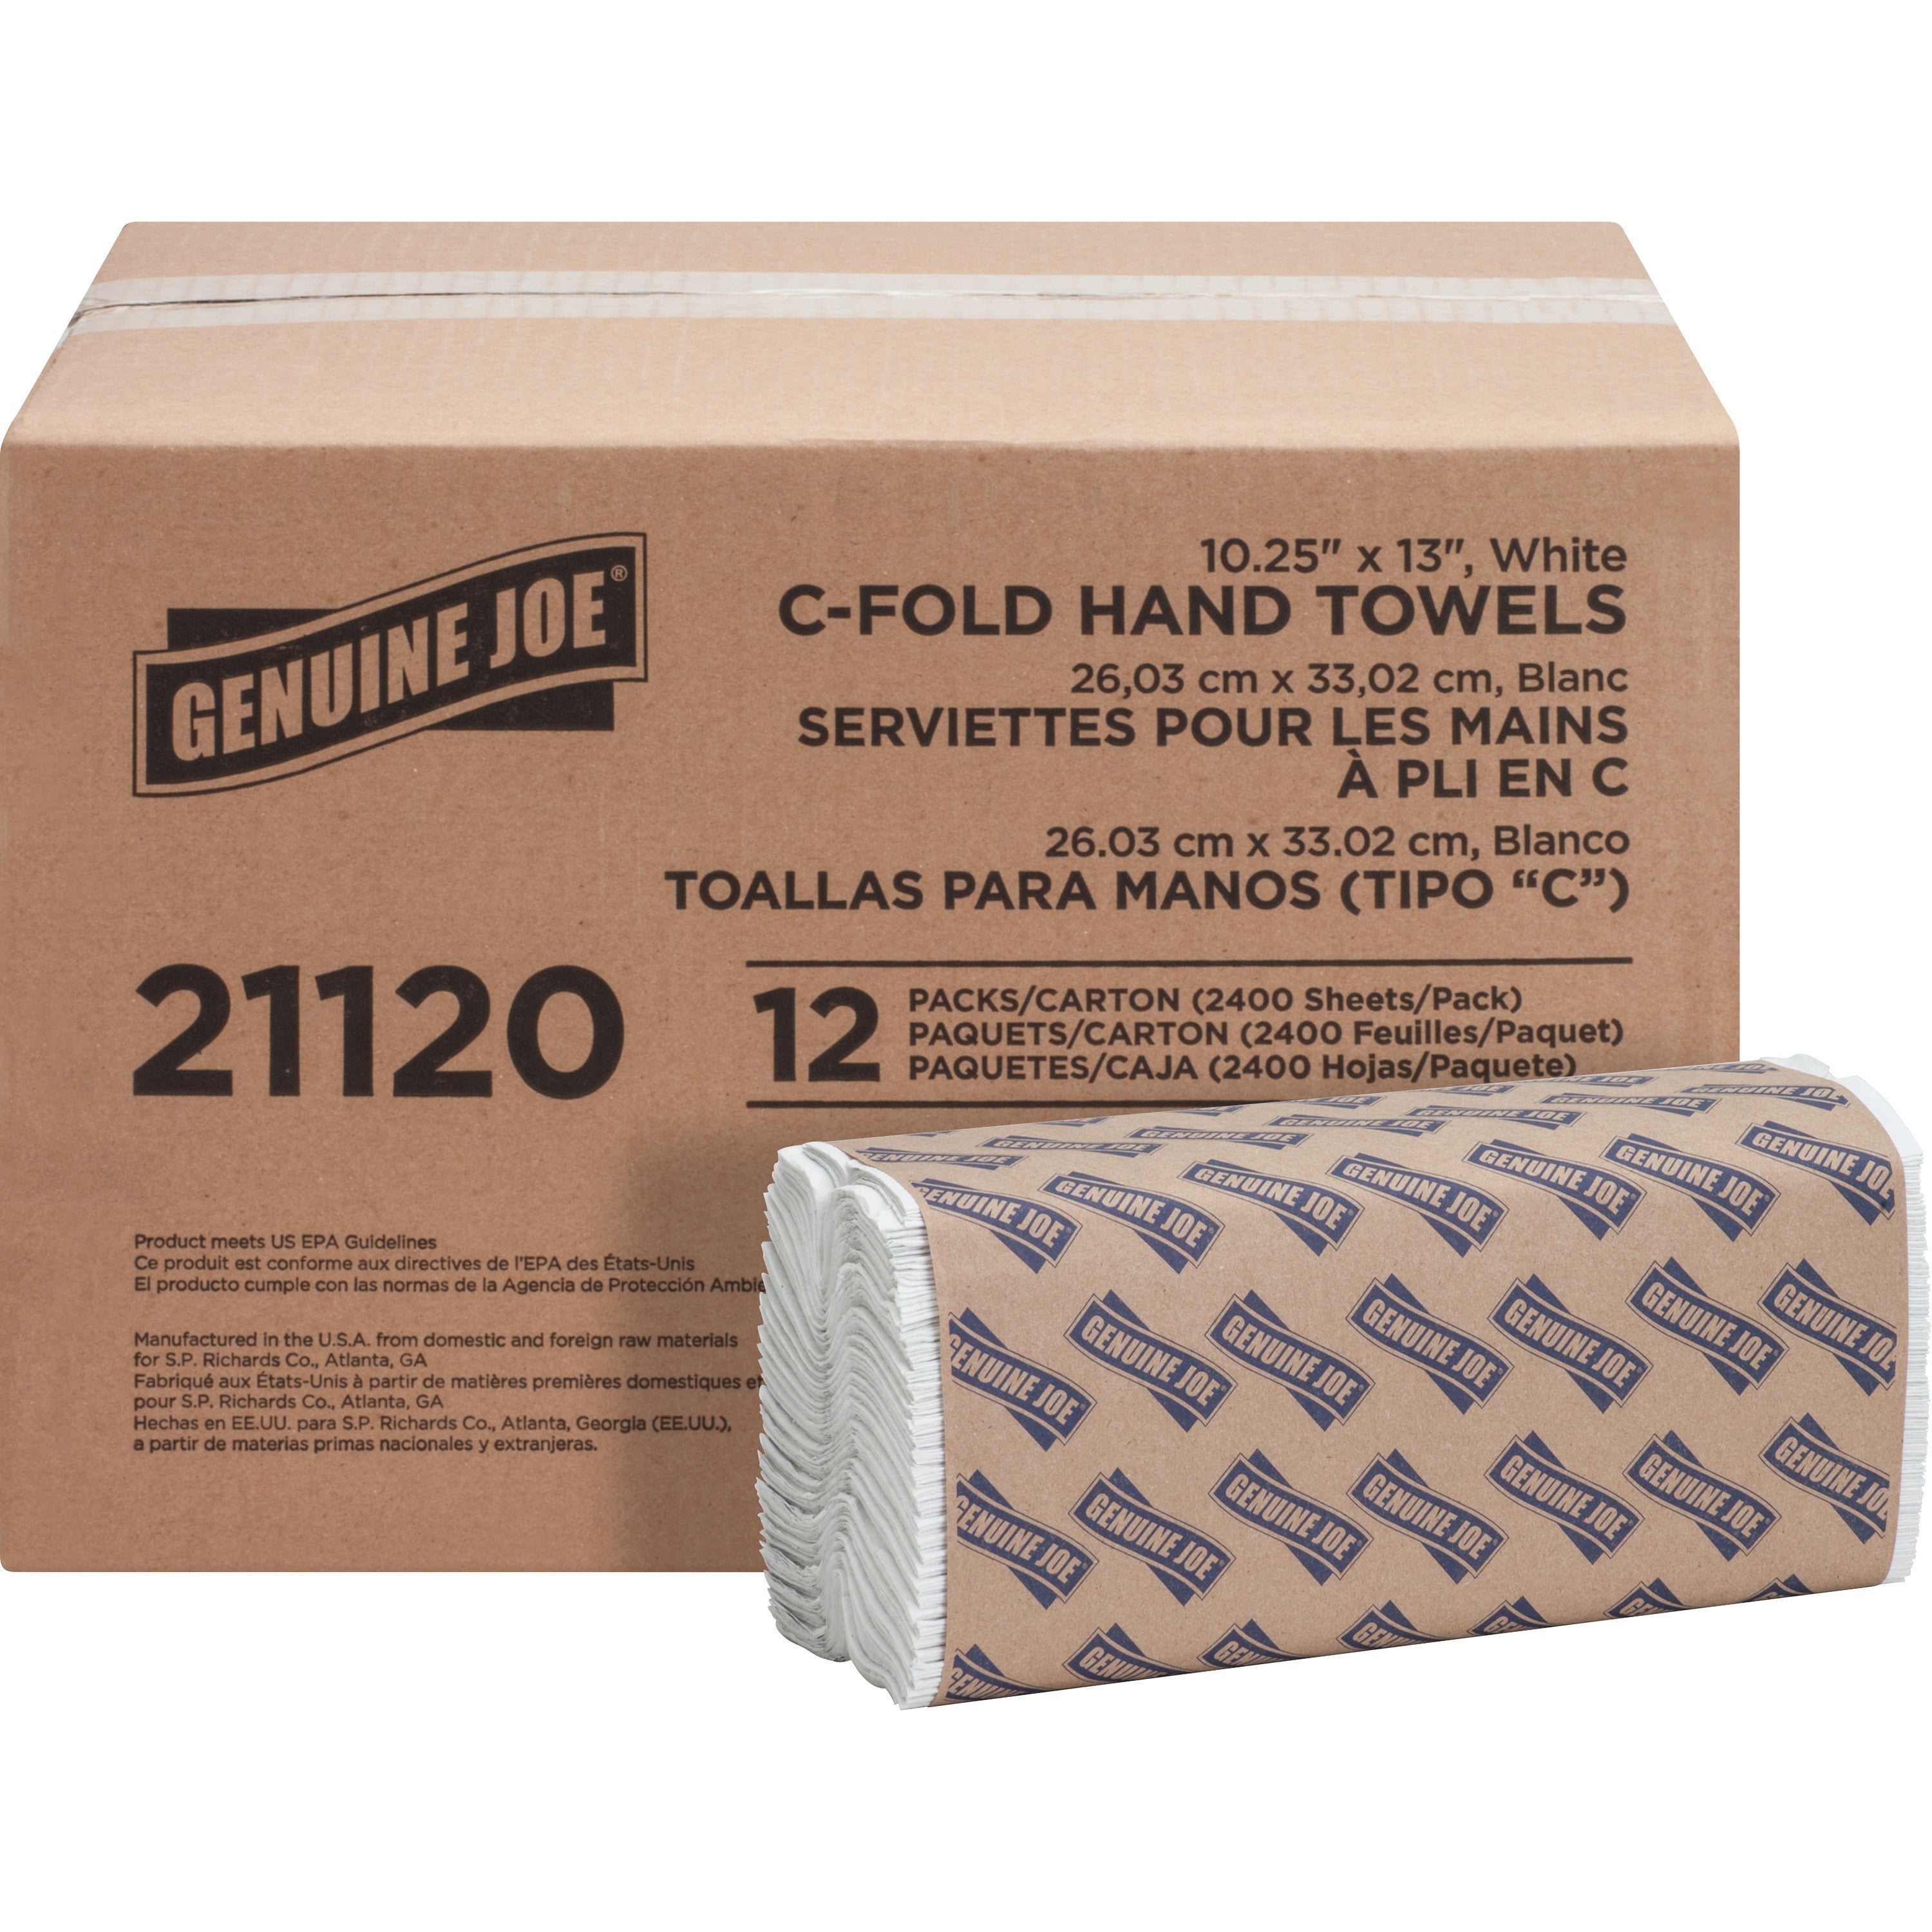 Genuine Joe C-Fold Paper Towels - 1 Ply - C-fold - 13" x 10" - White - Absorbent, Embossed - For Washroom, Restroom, Public Facilities - 200 Per Pack - 12 / Carton - 